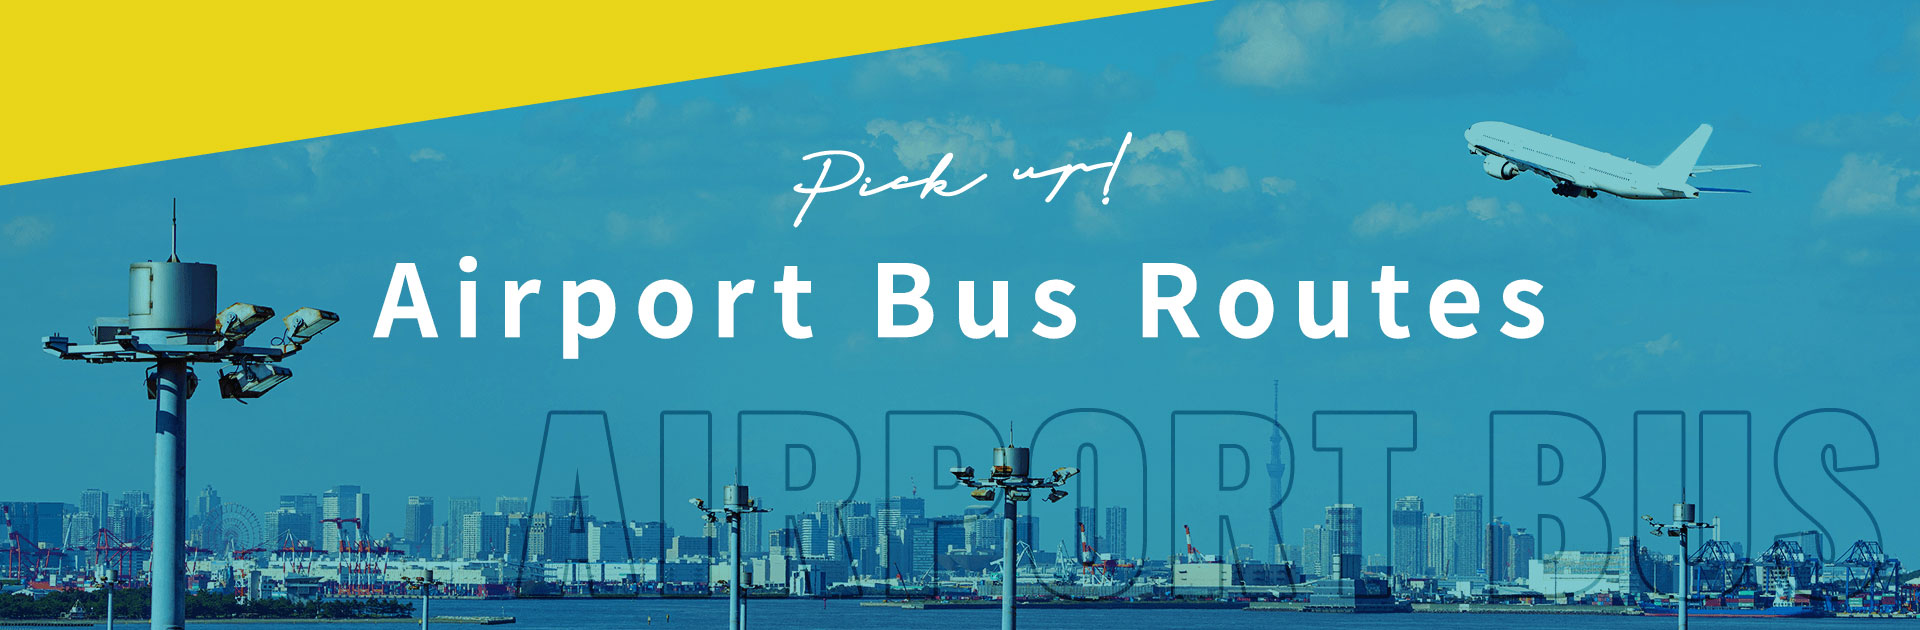 Airport Bus Routes